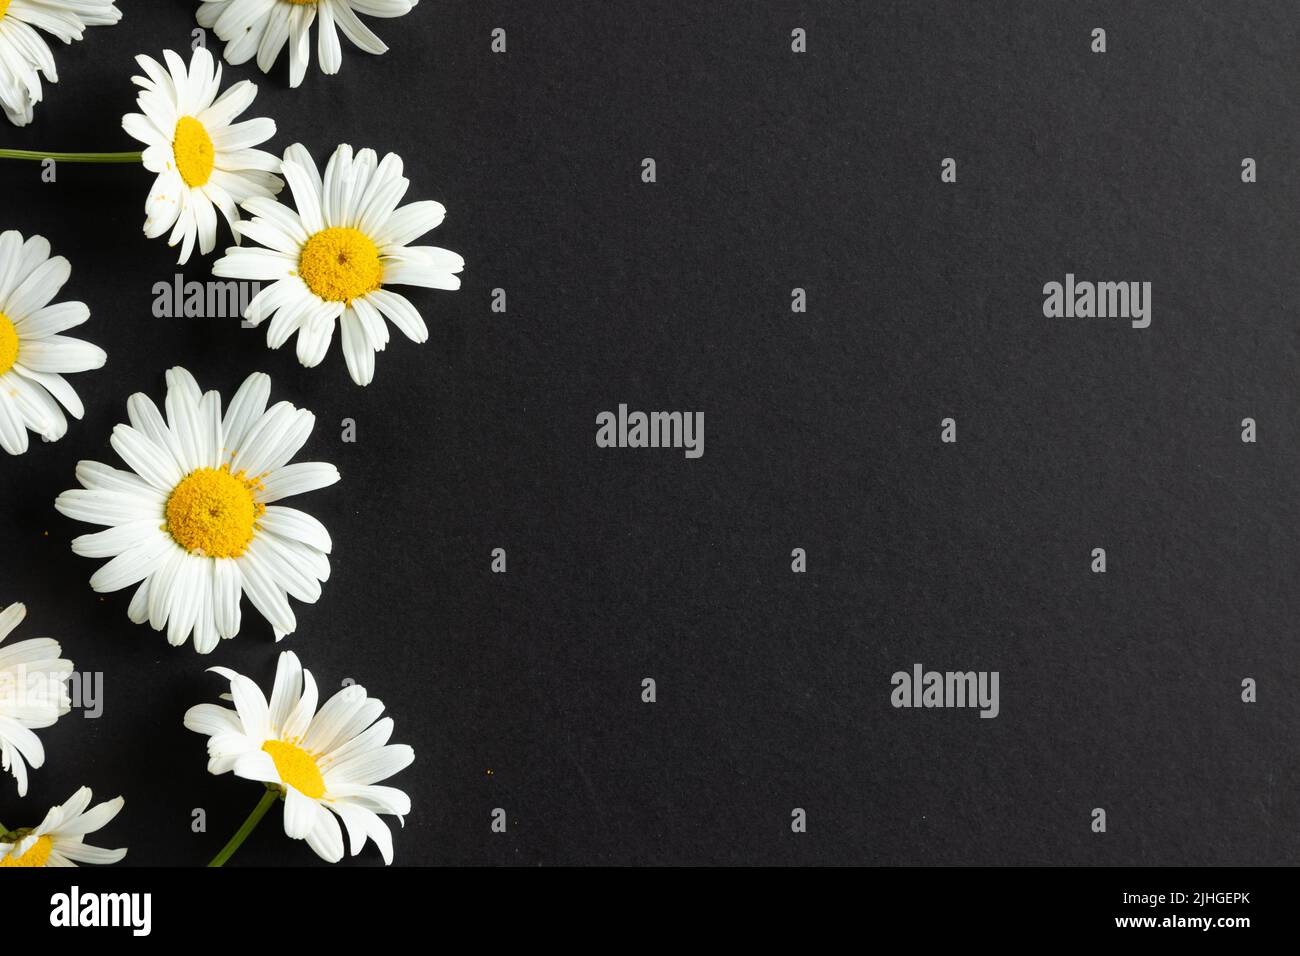 Border of white daisy flowers with bright yellow middles on a black background with copy space Stock Photo